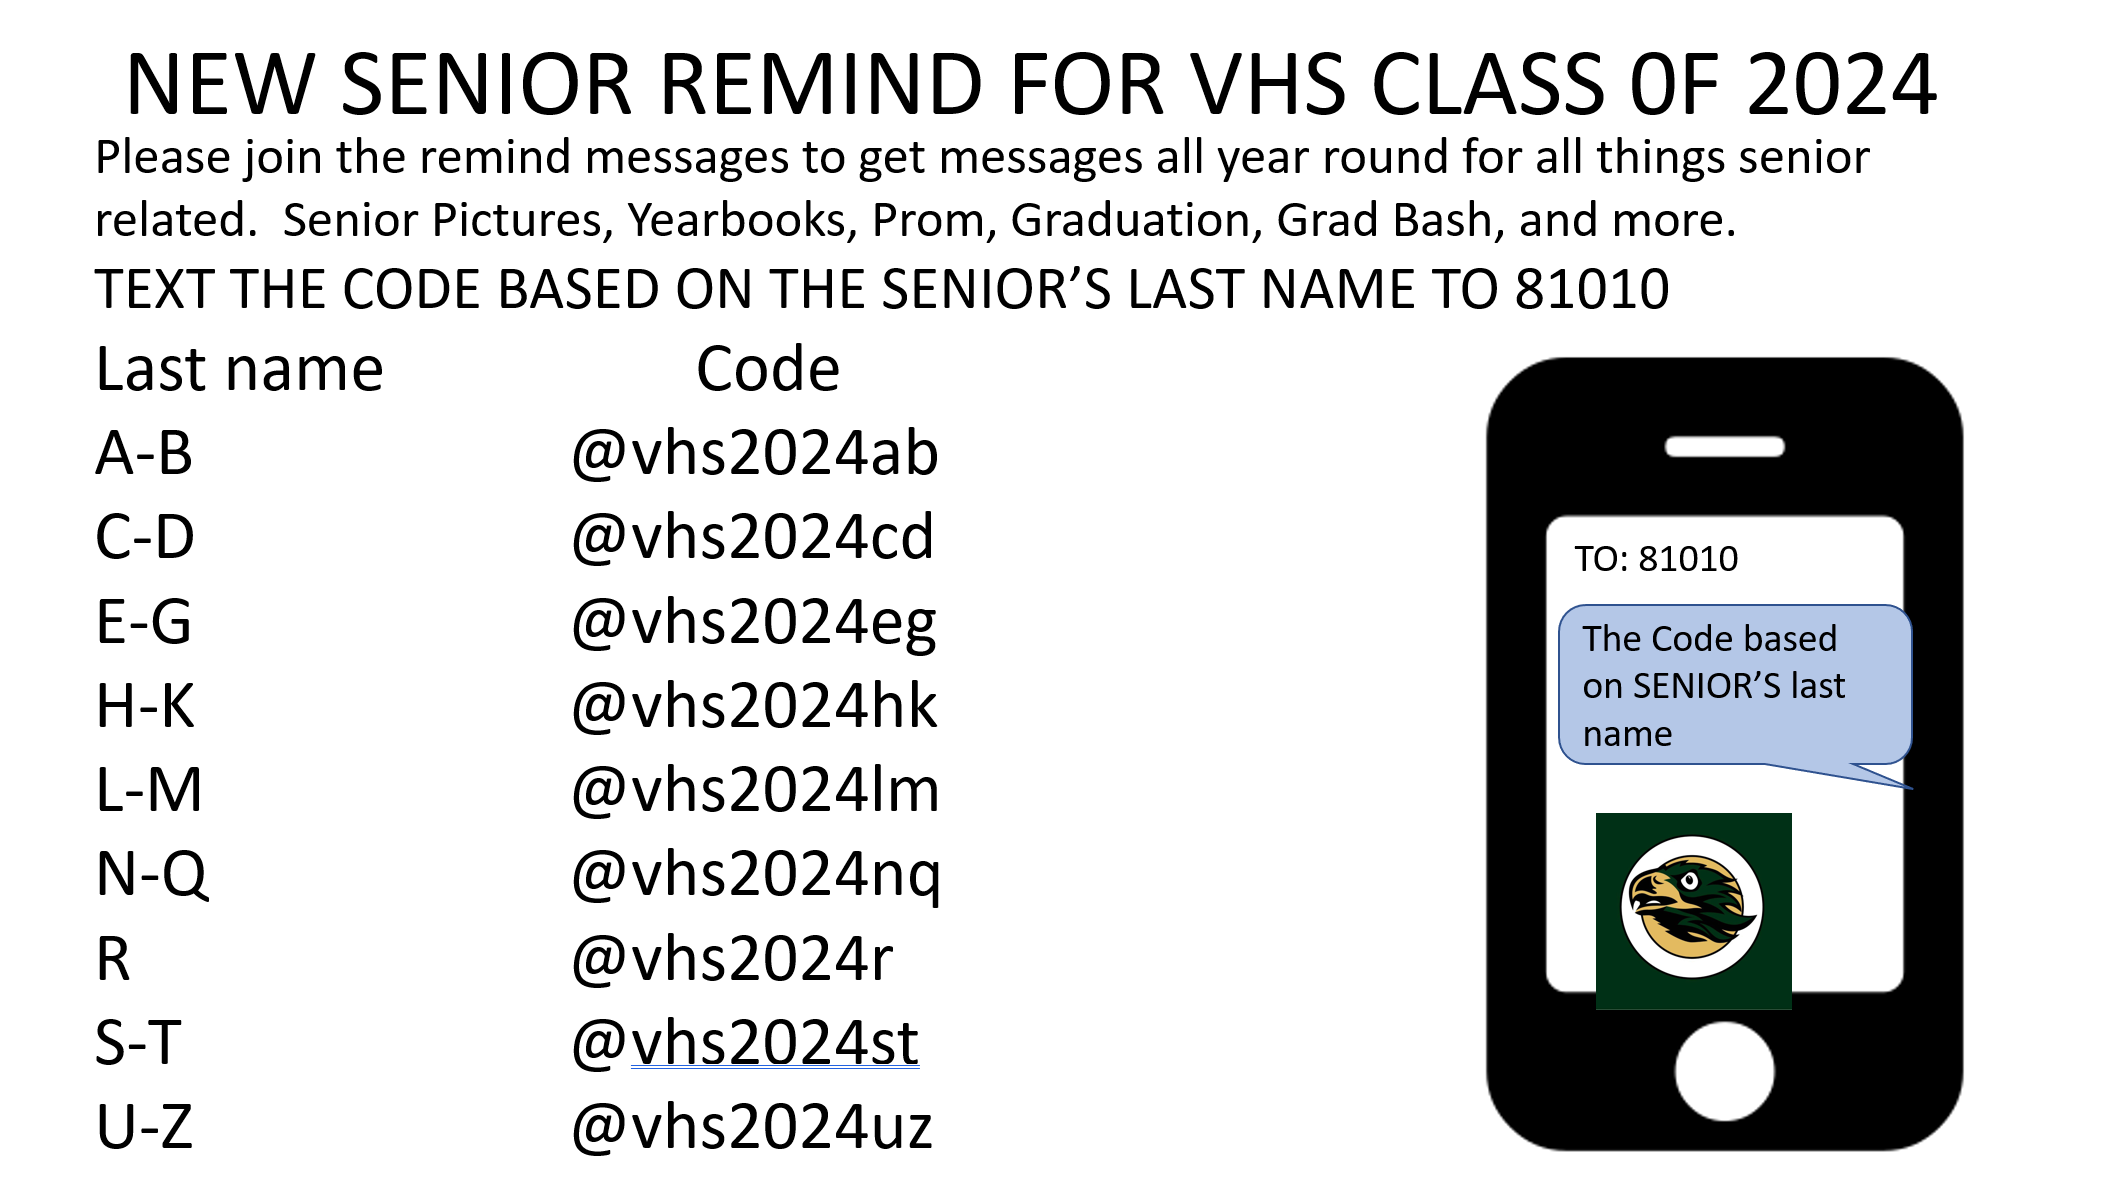 New Senior Remind fo VHS Class of 2024